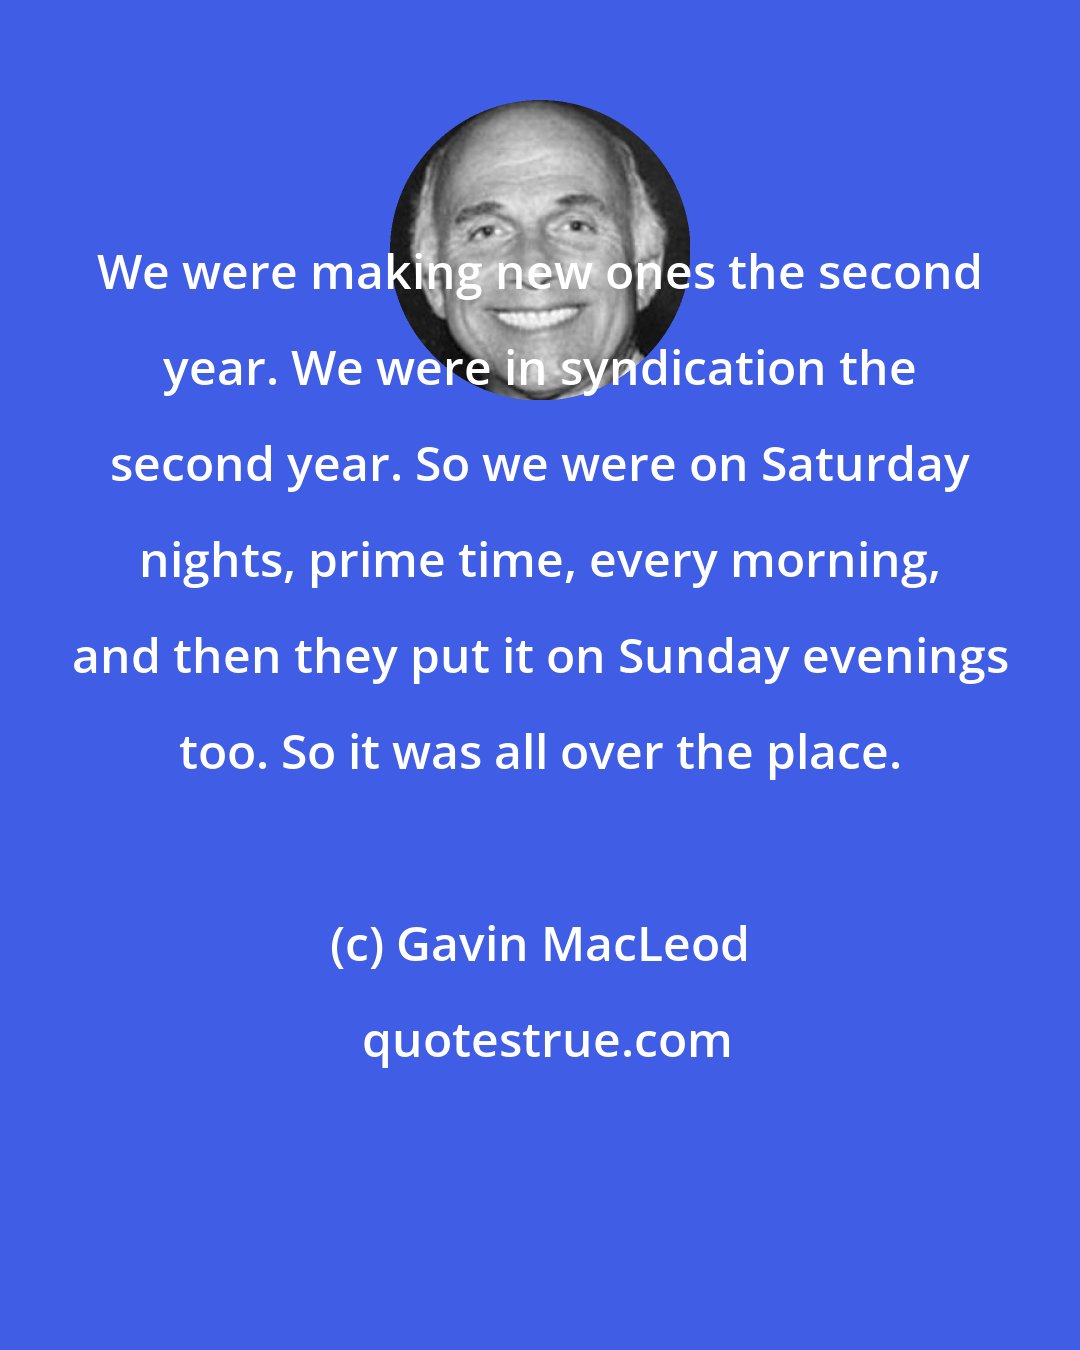 Gavin MacLeod: We were making new ones the second year. We were in syndication the second year. So we were on Saturday nights, prime time, every morning, and then they put it on Sunday evenings too. So it was all over the place.